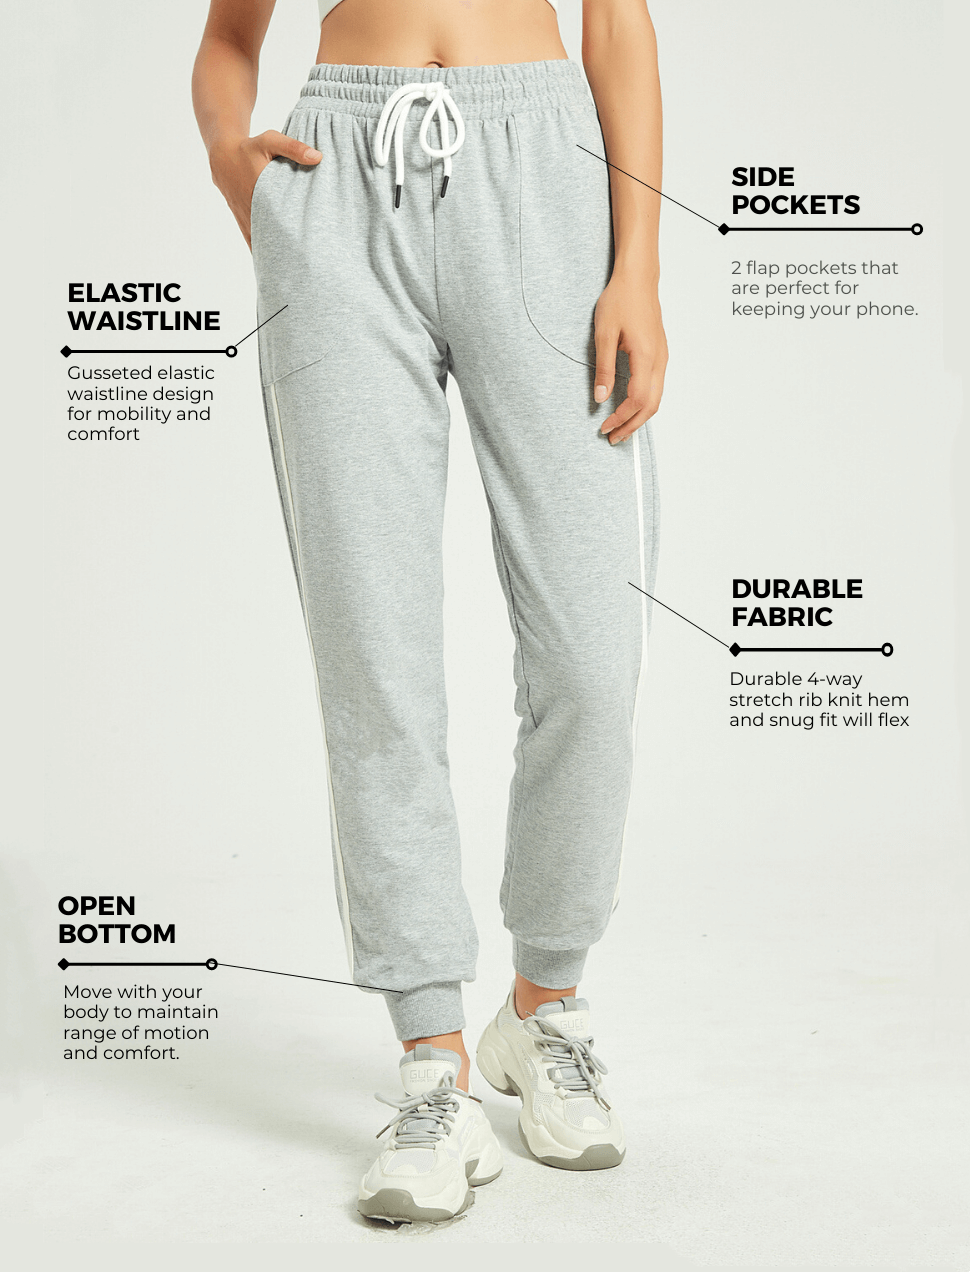 Women Sweatpants with Large Pockets Track Running Joggers Lounge